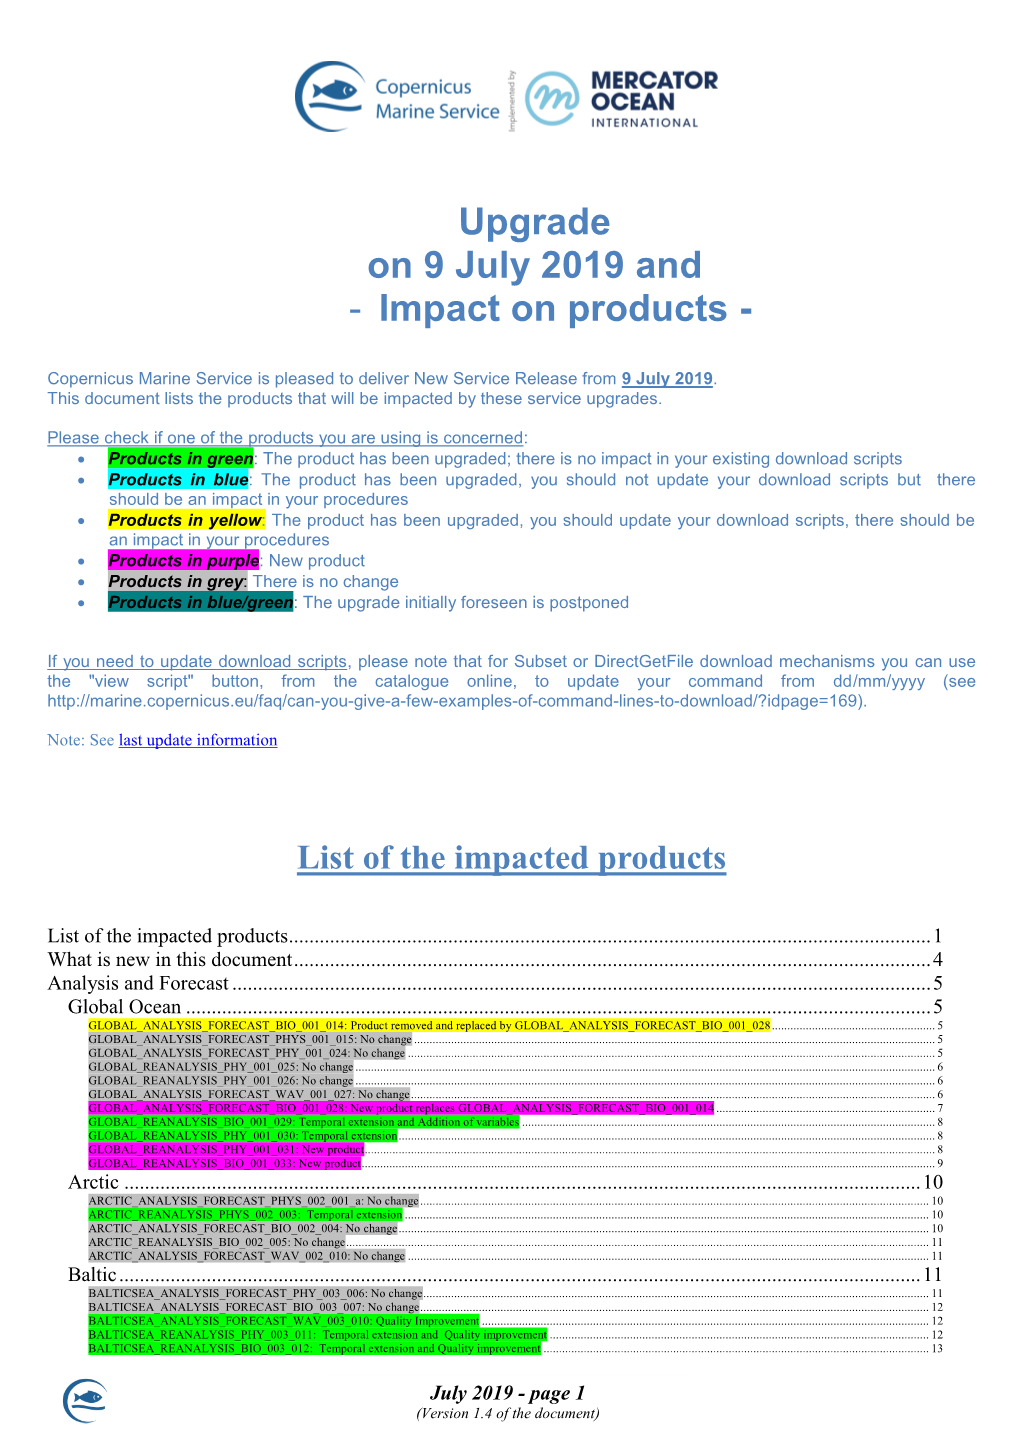 Upgrade on 9 July 2019 and - Impact on Products